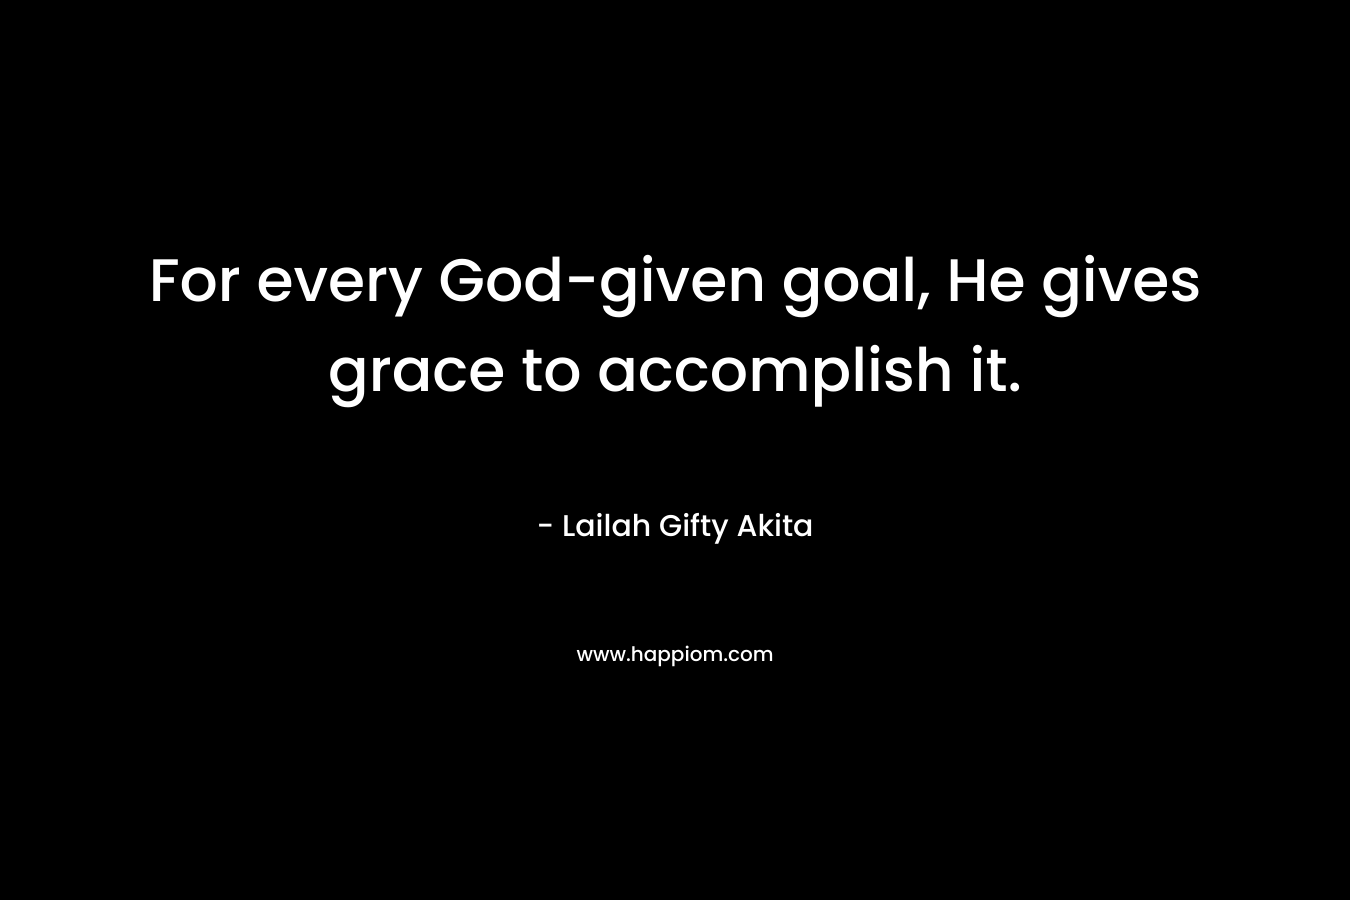 For every God-given goal, He gives grace to accomplish it.